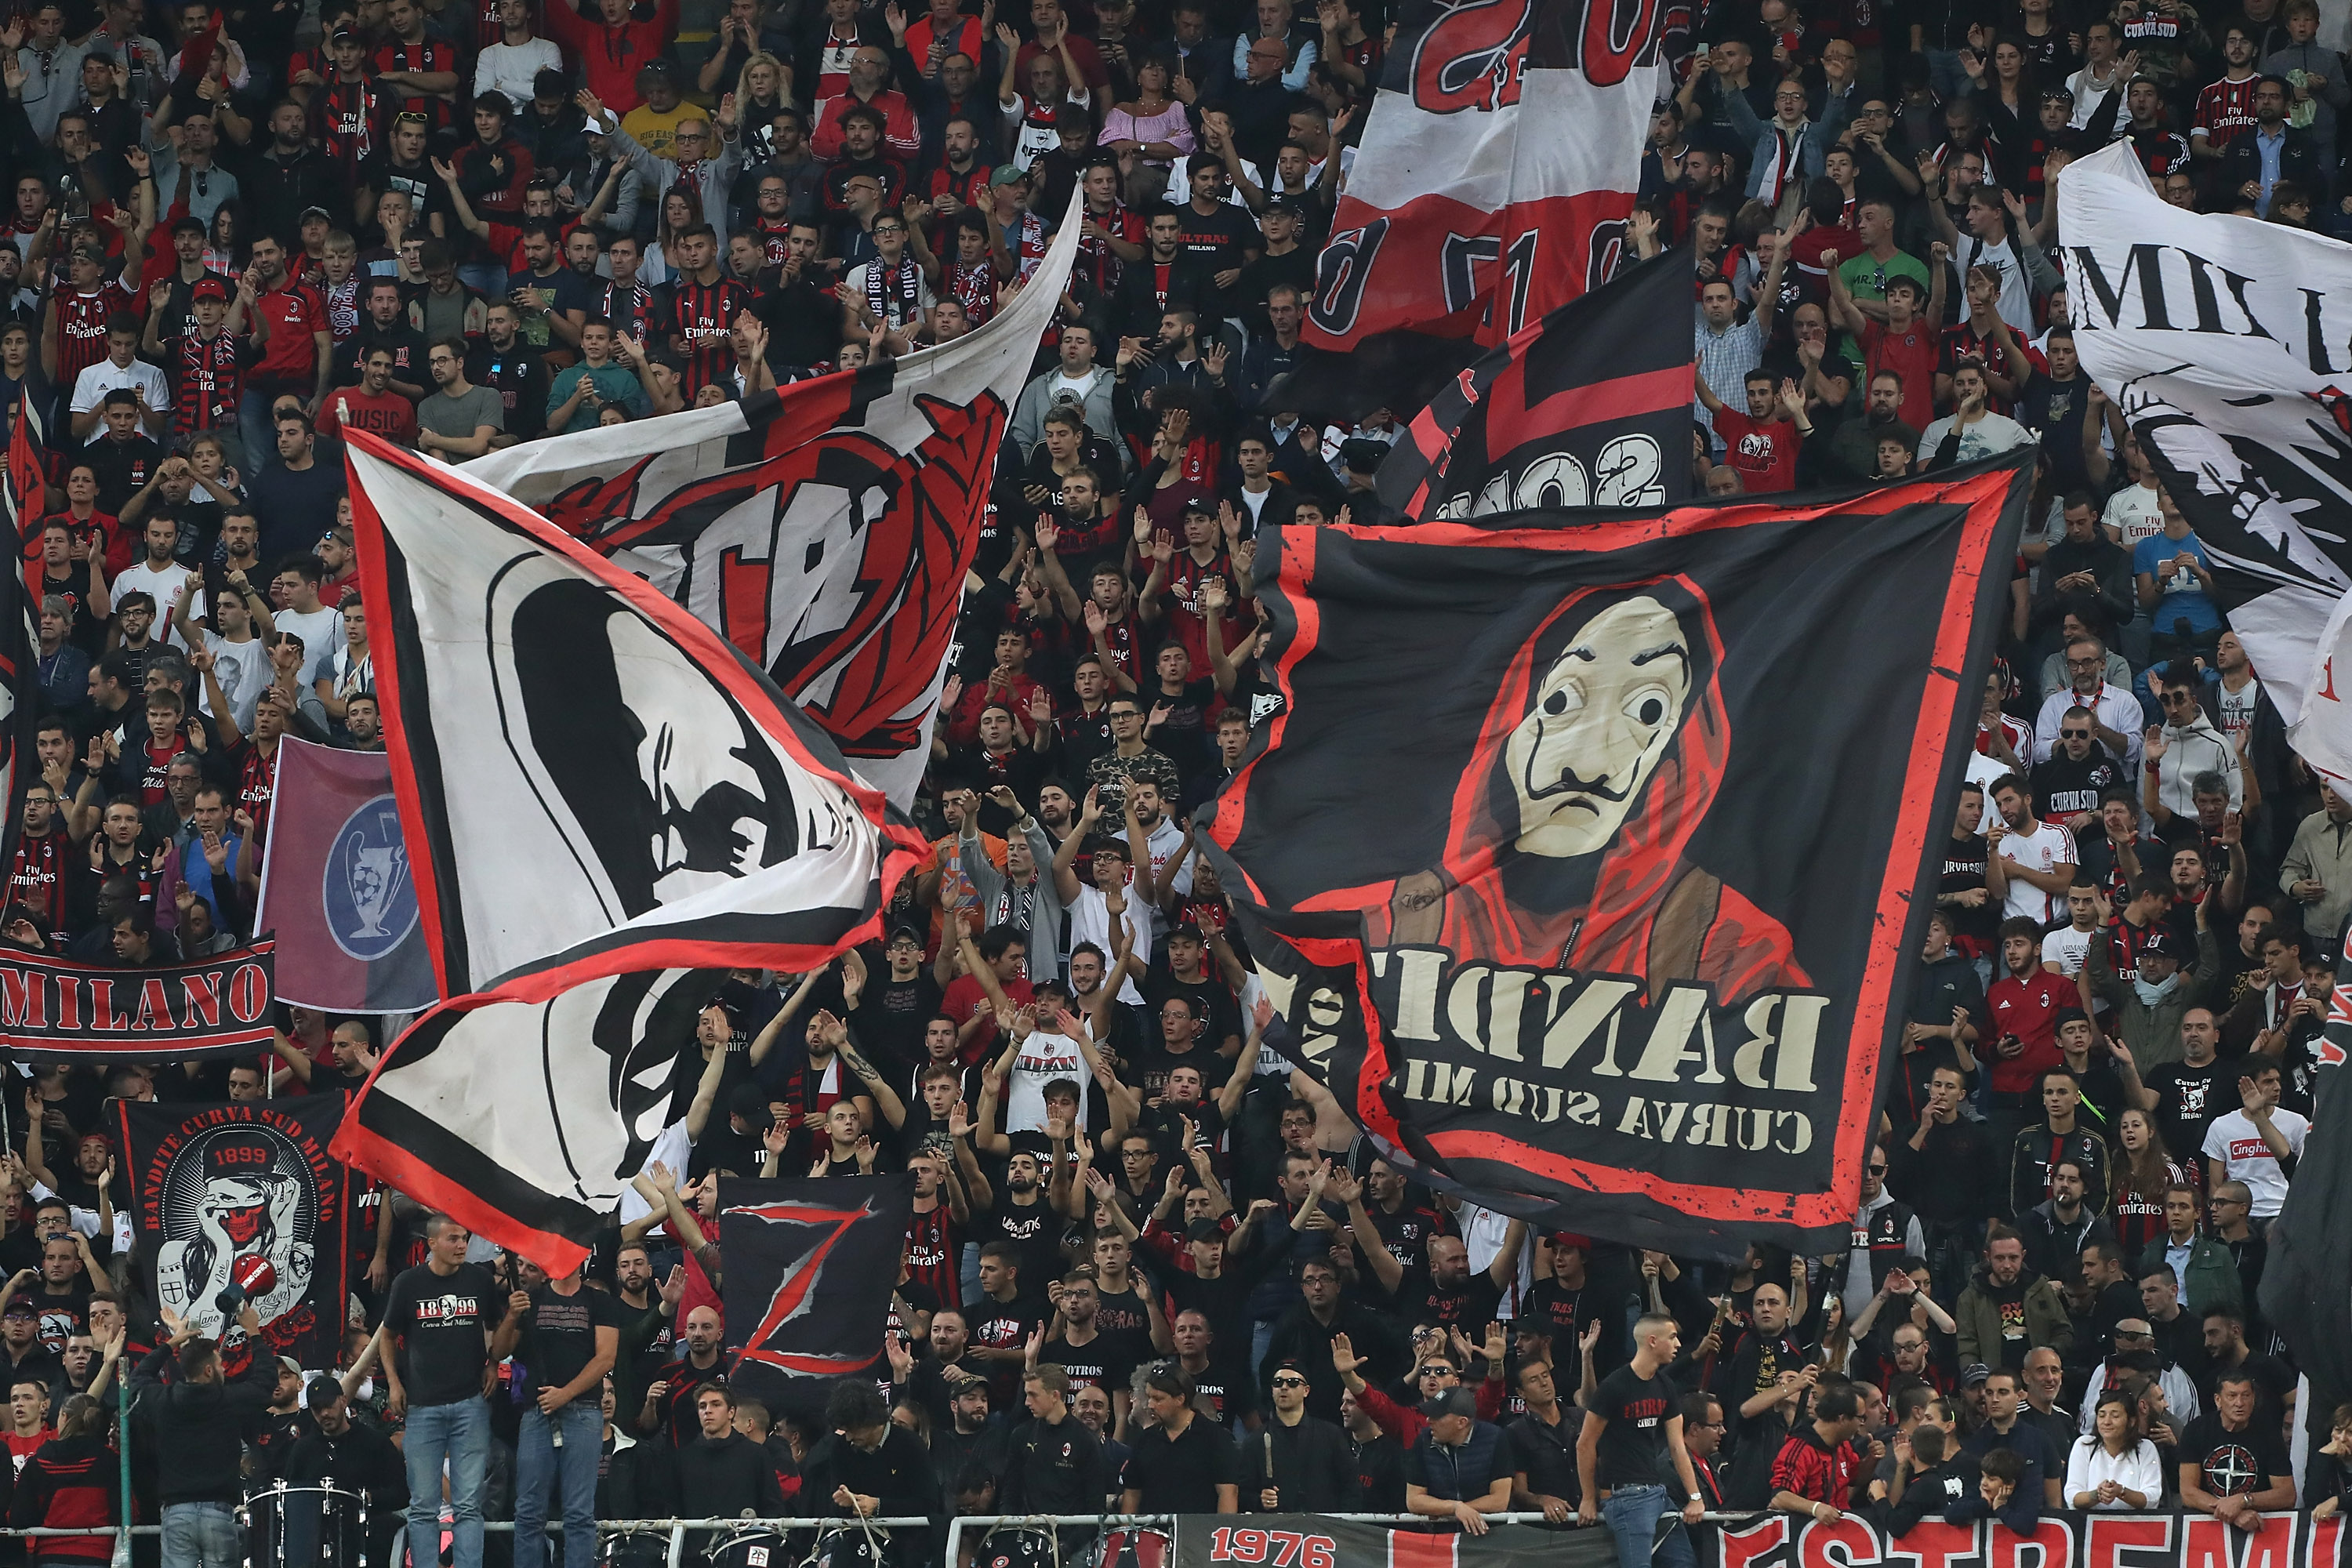 MILAN, ITALY - OCTOBER 04:  The AC Milan fans show their support during the UEFA Europa League Group F match between AC Milan and Olympiacos at Stadio Giuseppe Meazza on October 4, 2018 in Milan, Italy.  (Photo by Marco Luzzani/Getty Images)